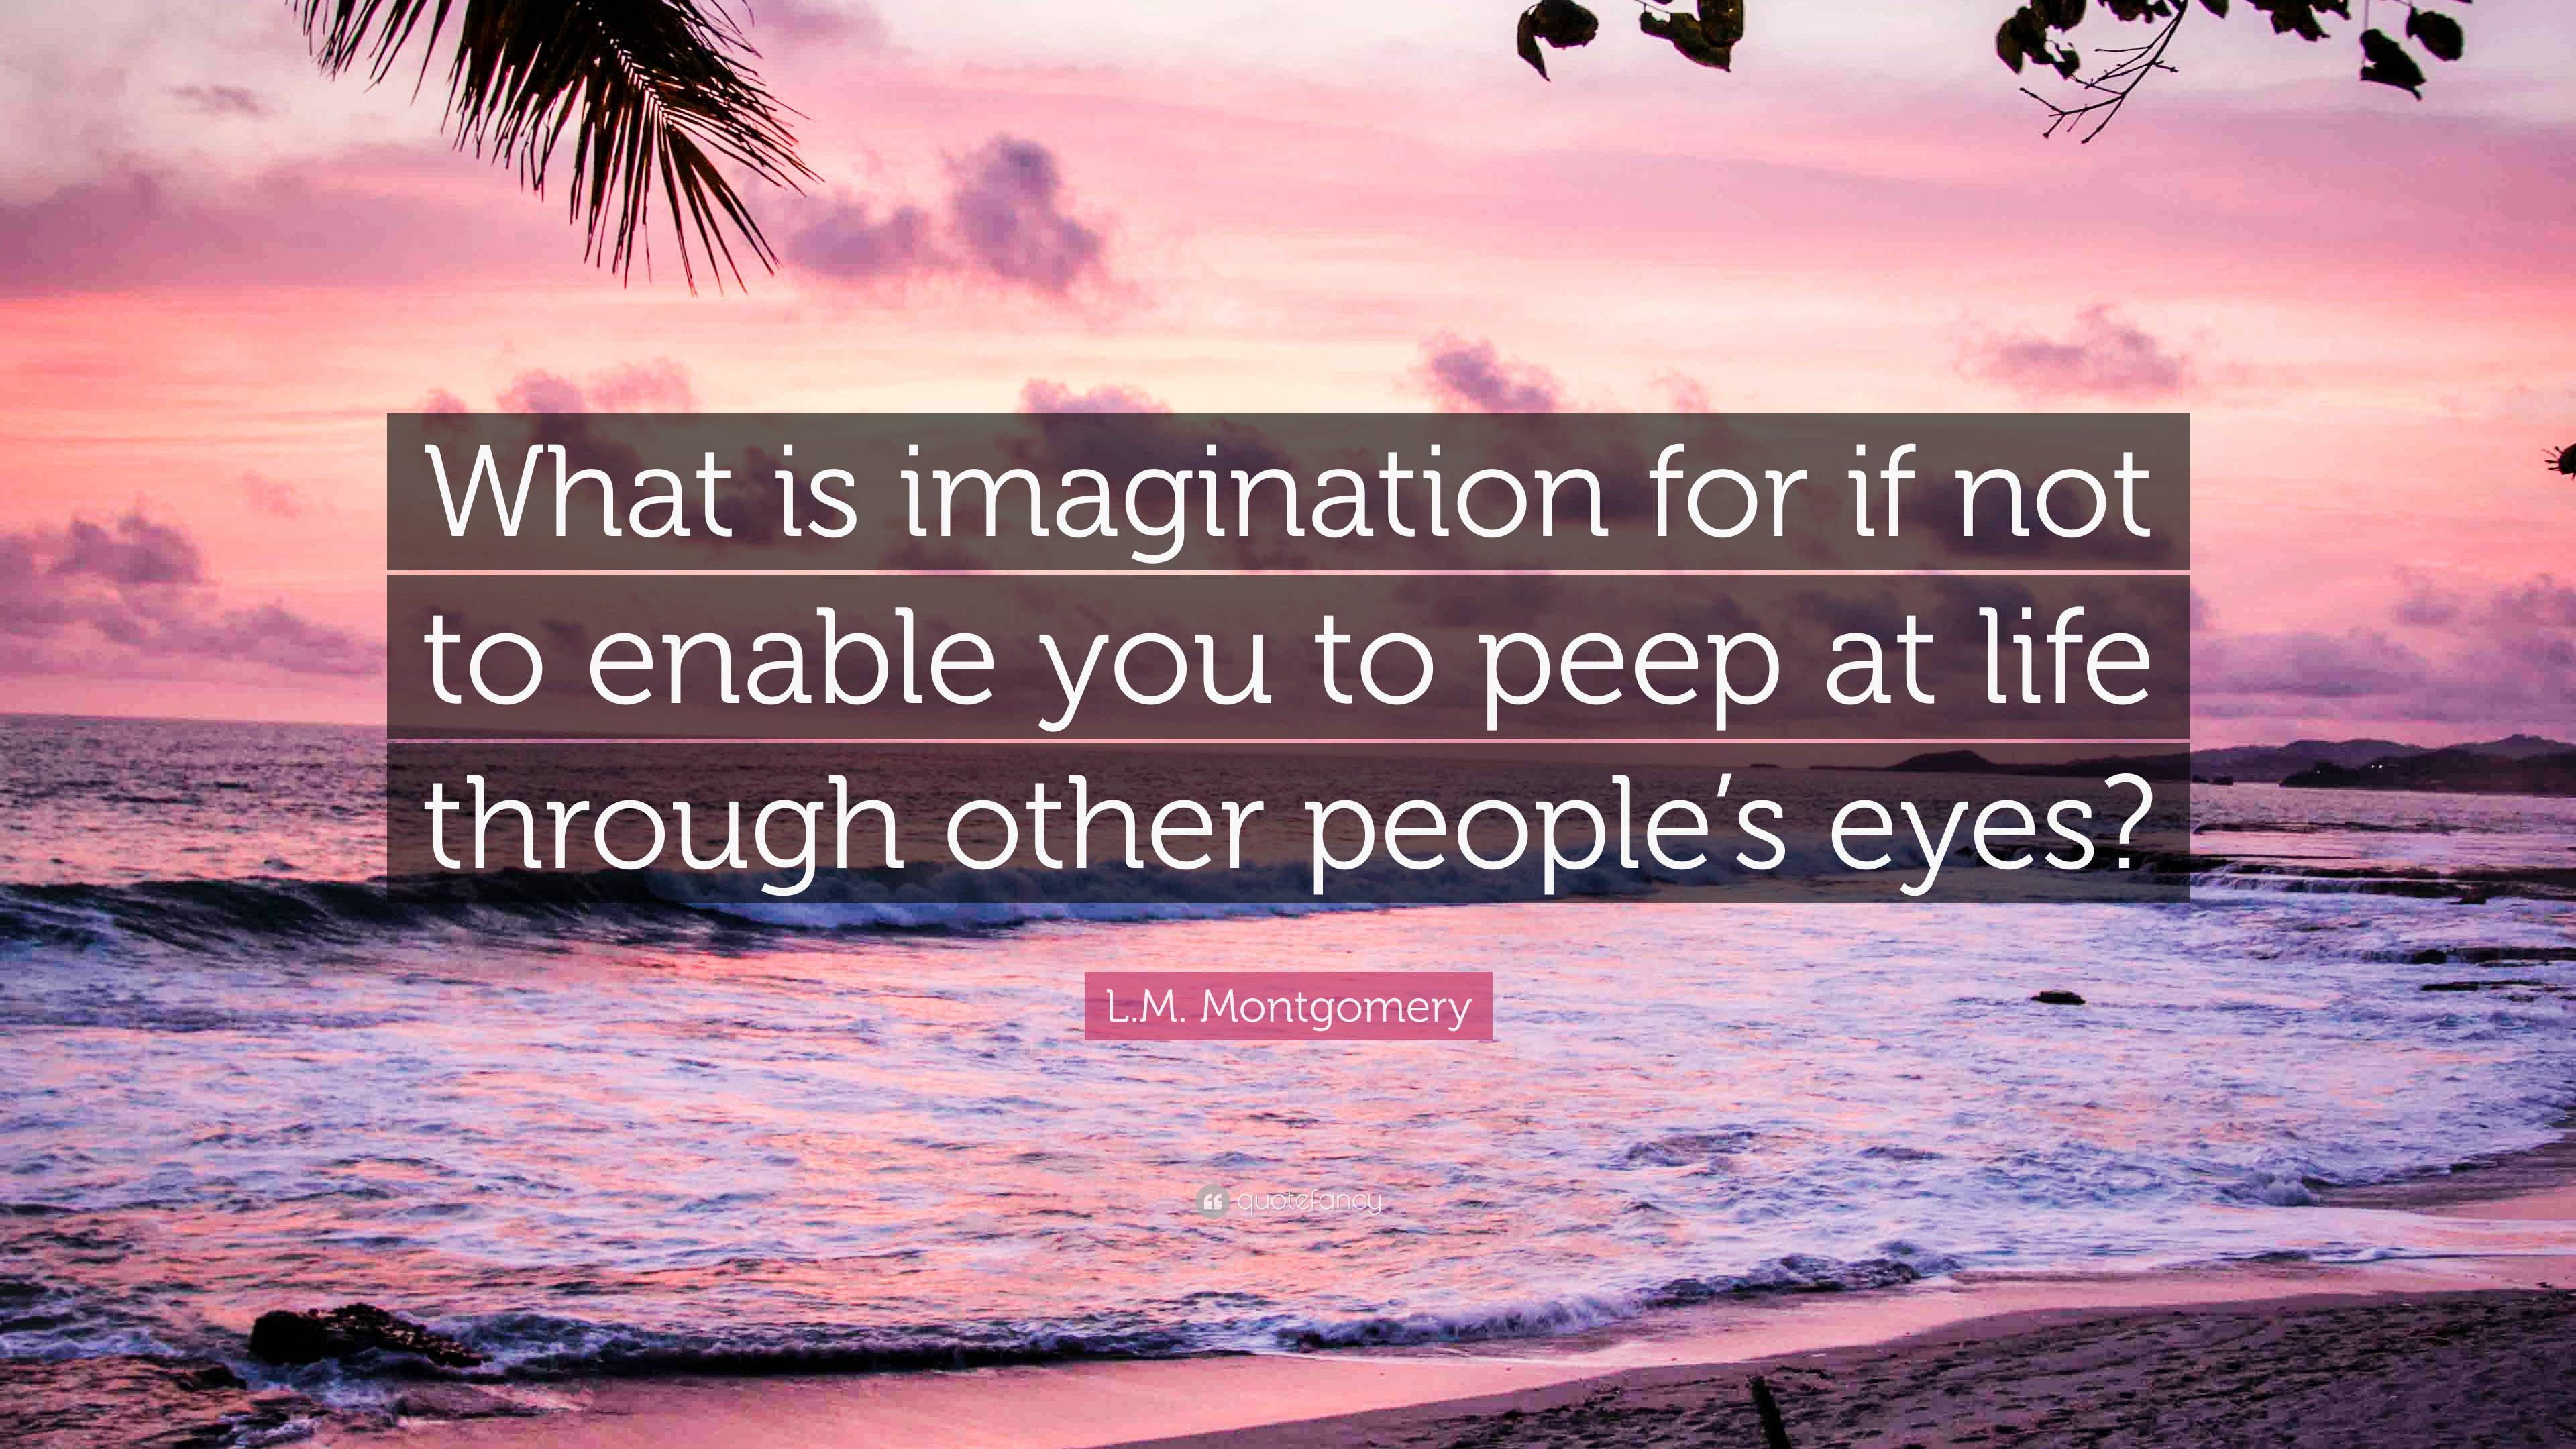 L.M. Montgomery Quote: “What is imagination for if not to enable you to ...